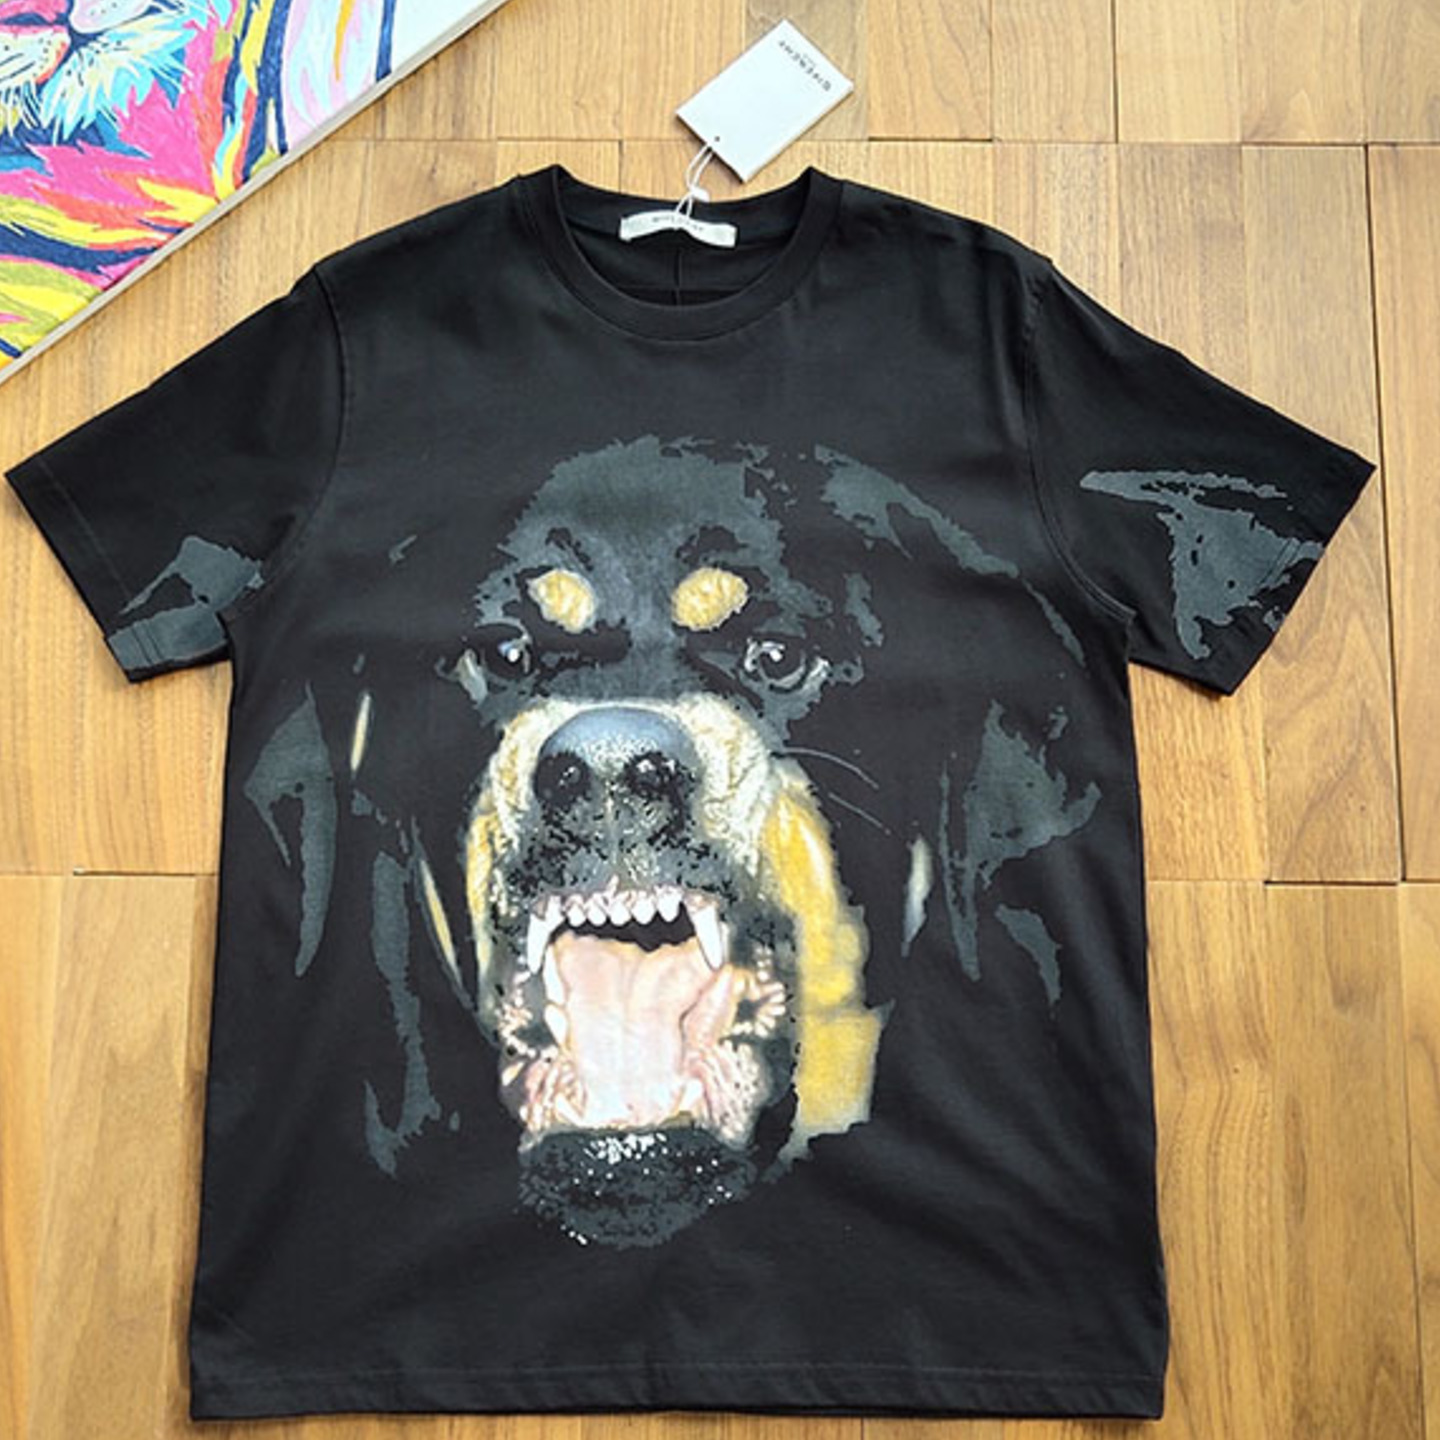  Givenchy Rottweiler printed T-shirt